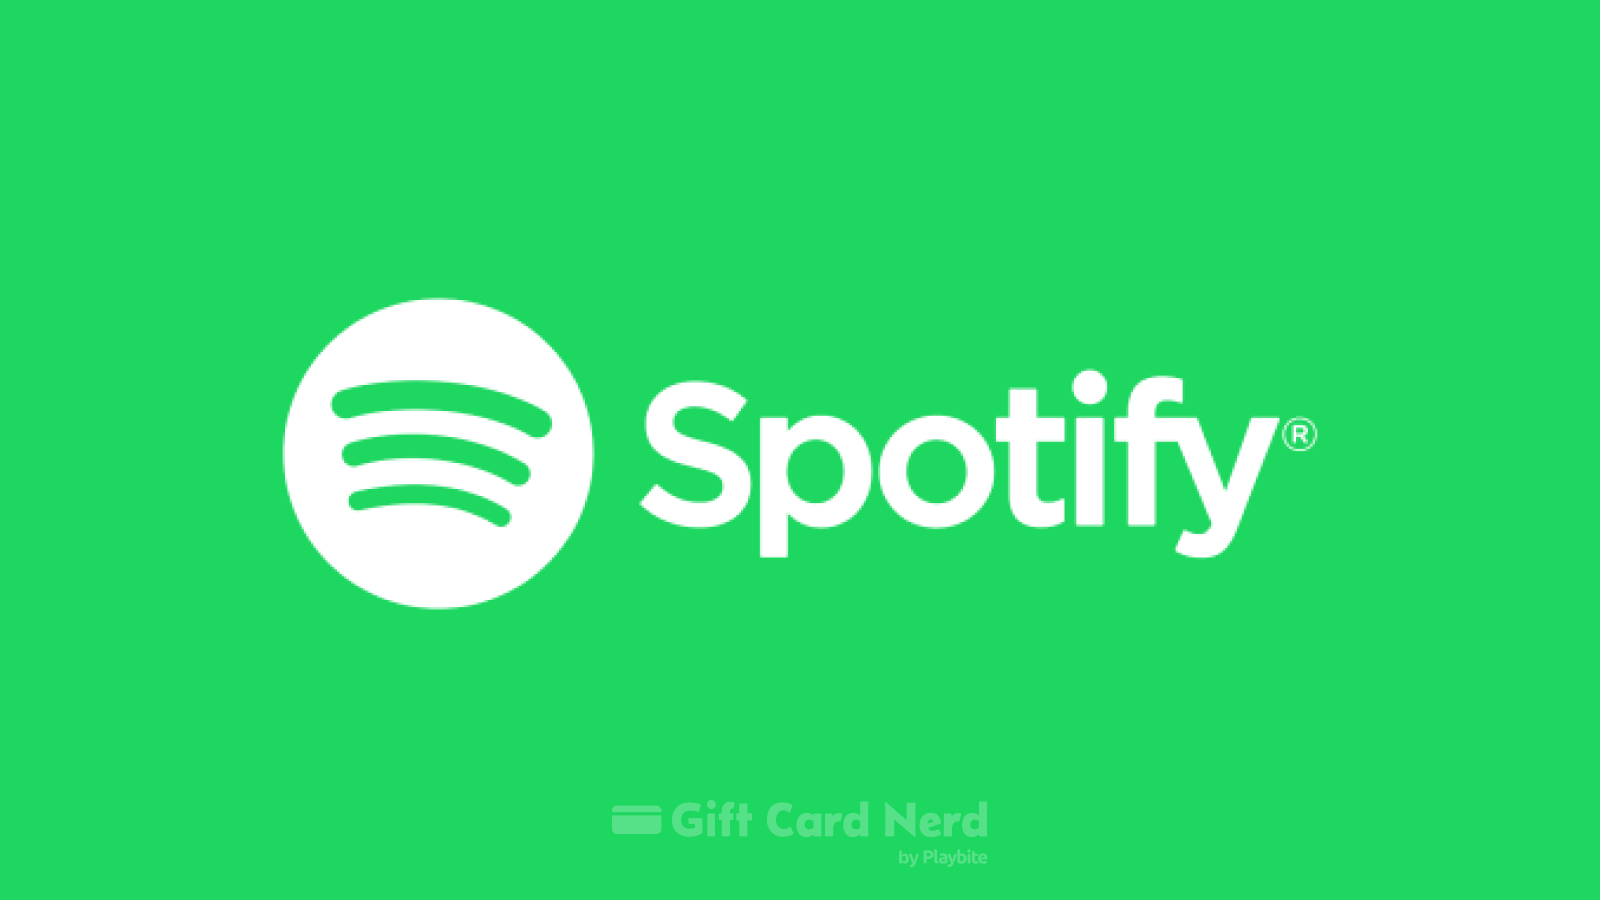 Can I Use a Spotify Gift Card on Apple Wallet?